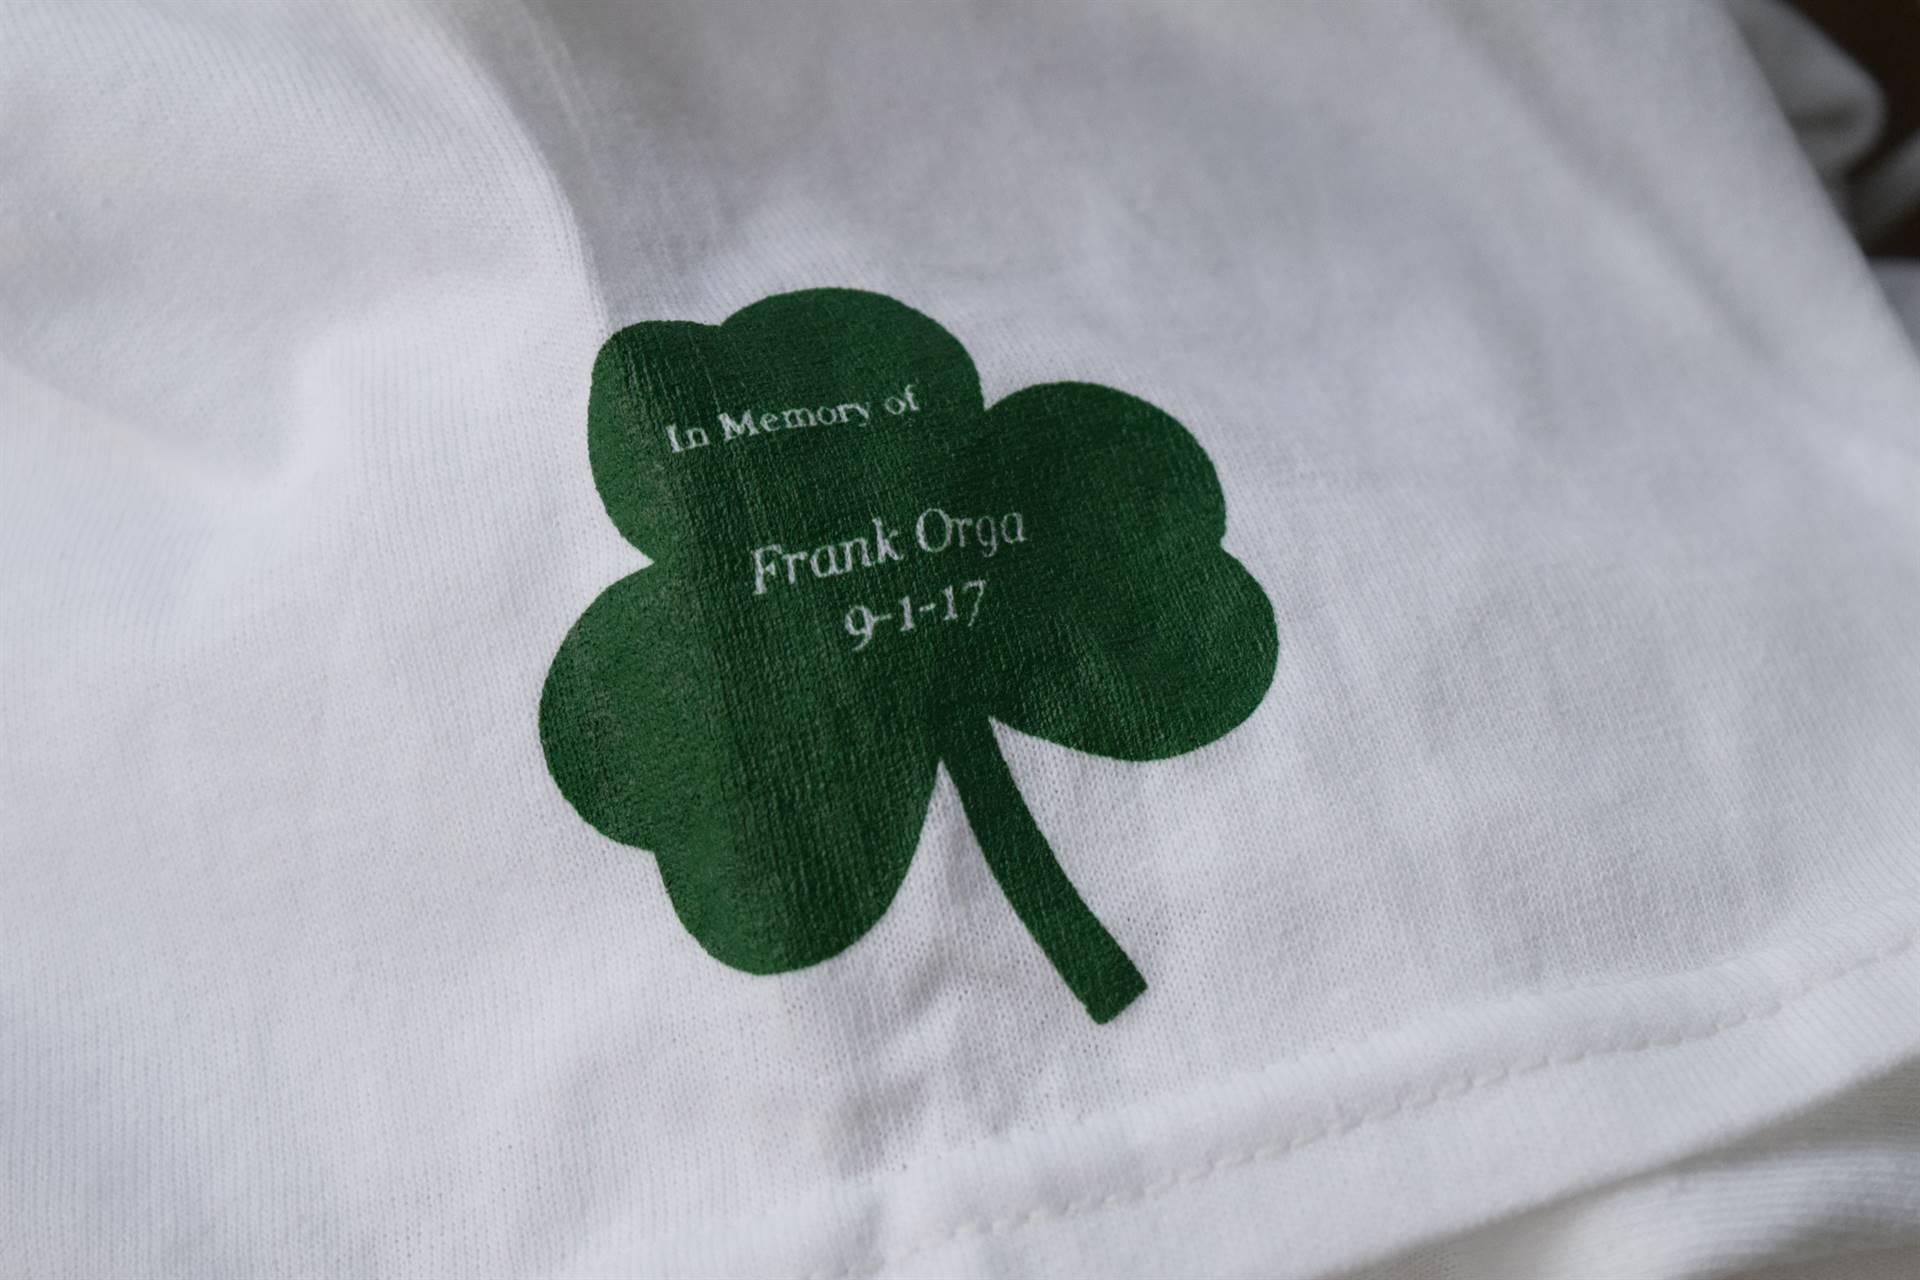 Shamrock patch on race shirt sleeve in memory of Frank Orgs